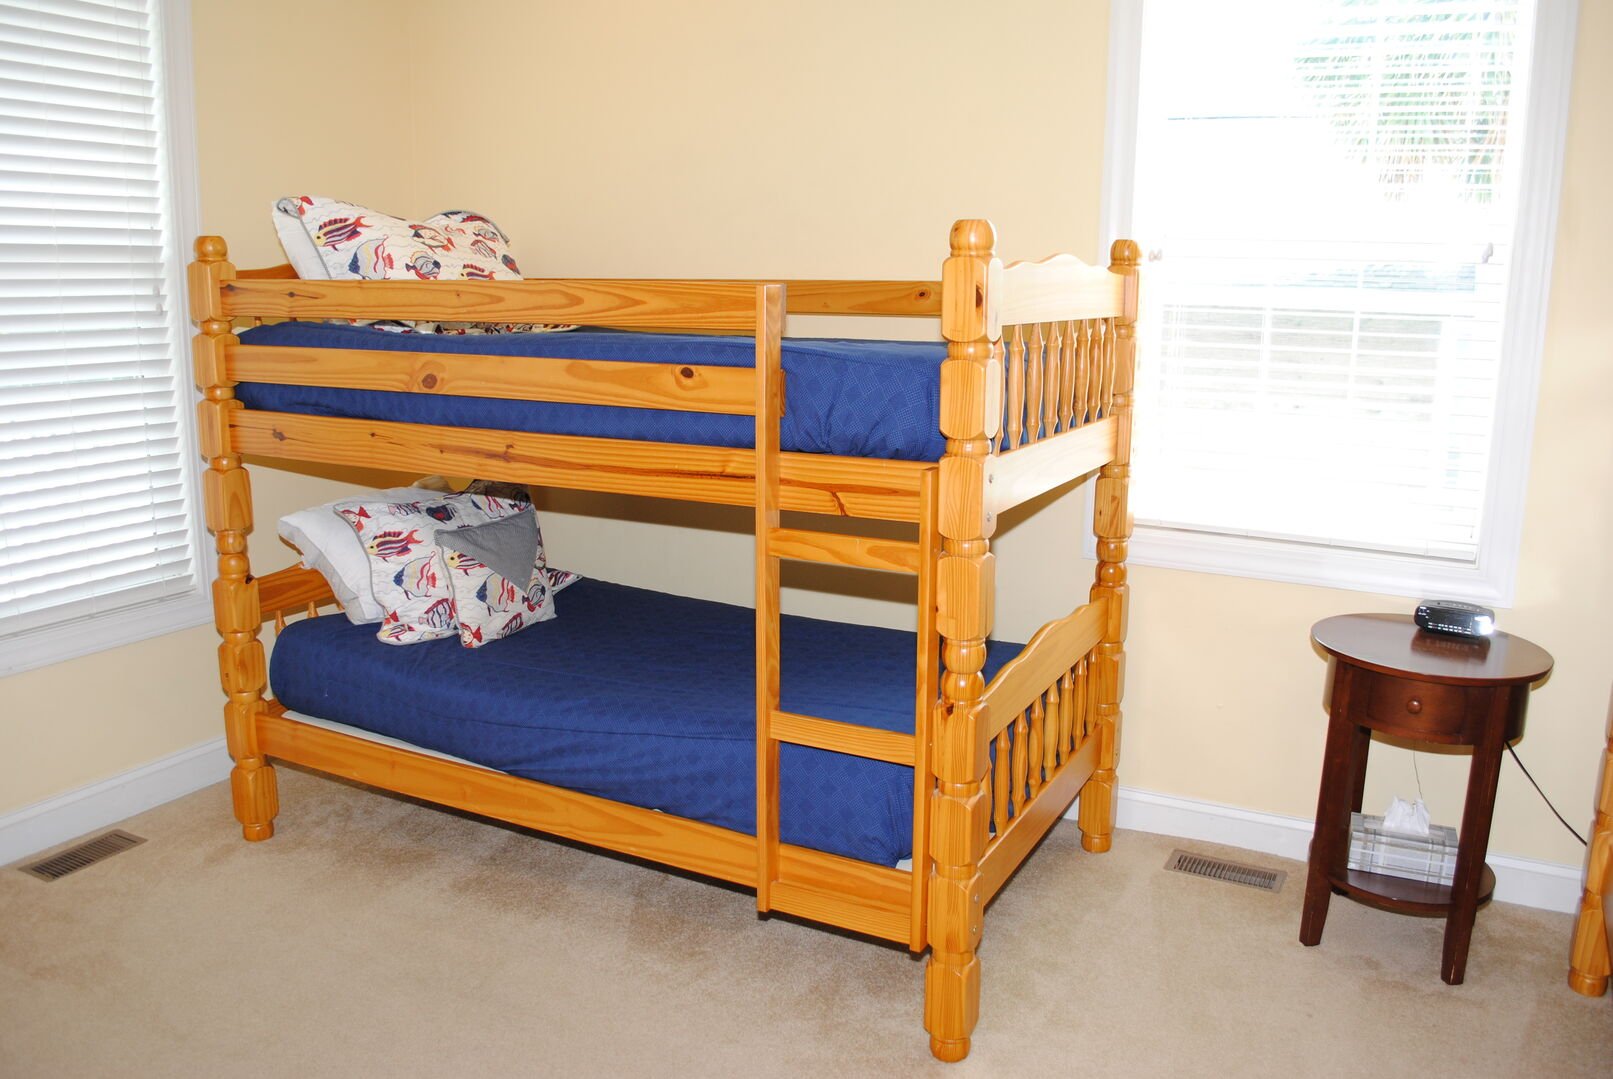 2 Sets of Bunk Beds - First Floor